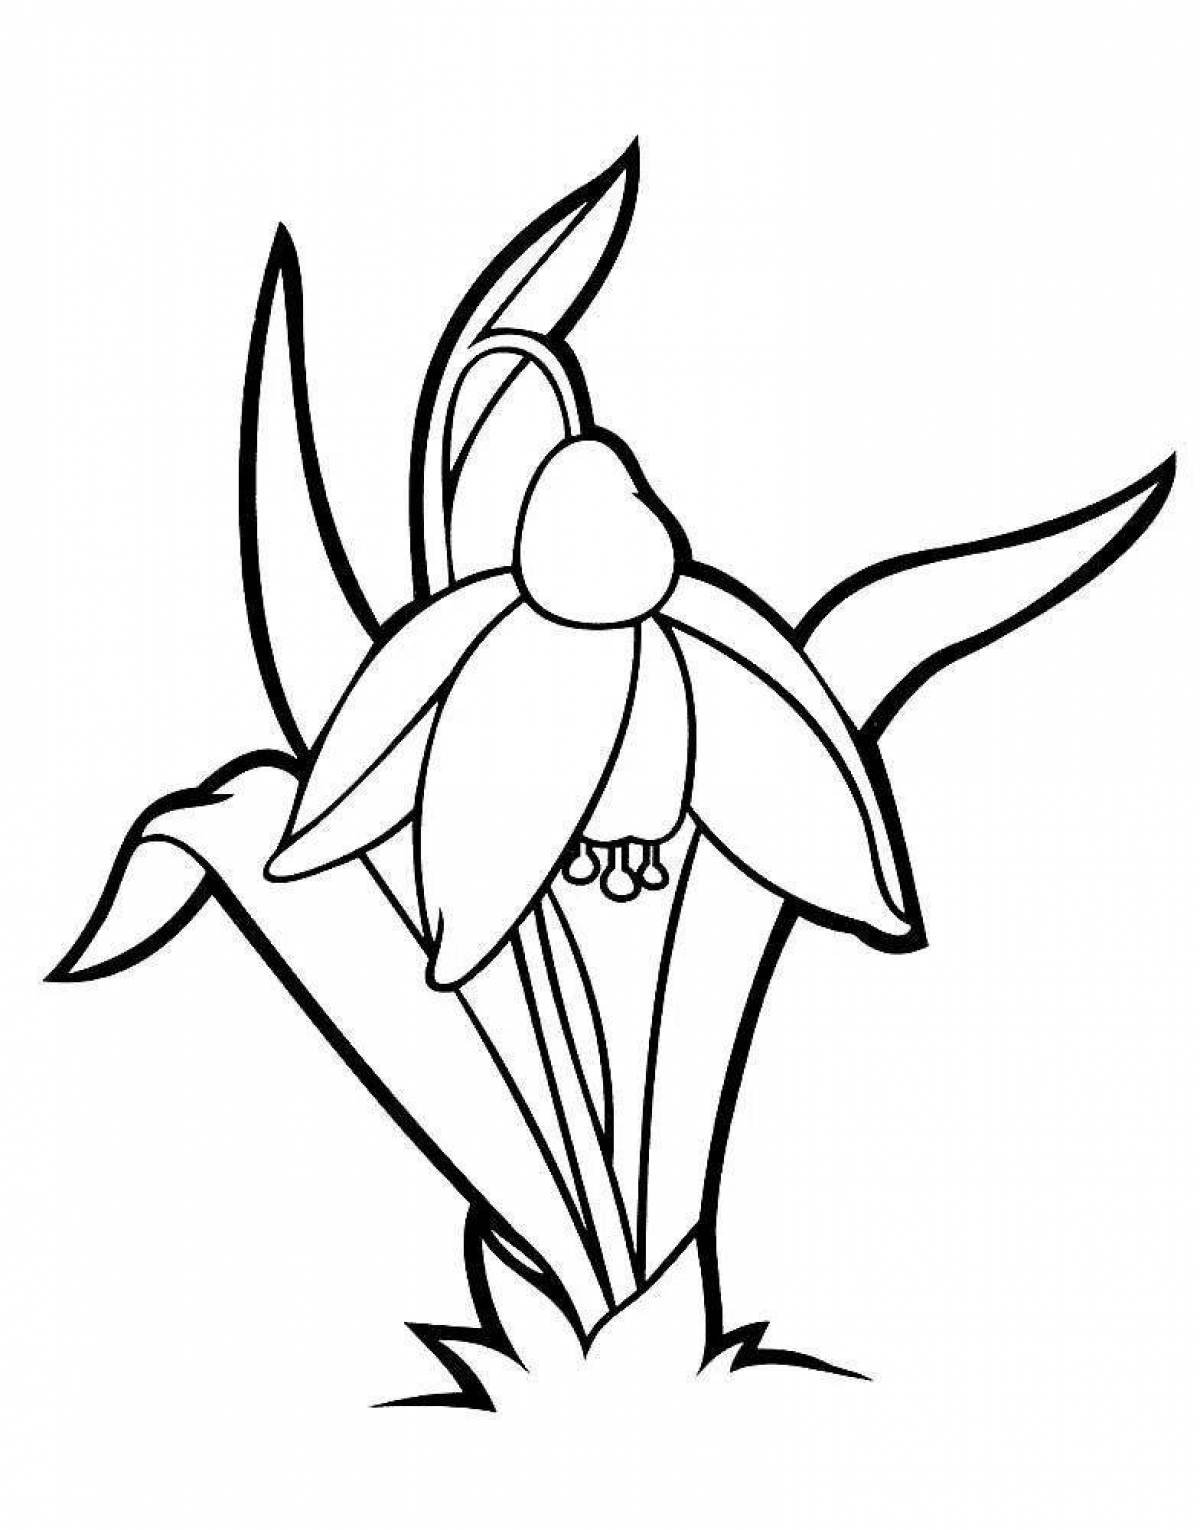 Sunny snowdrops coloring pages for kids